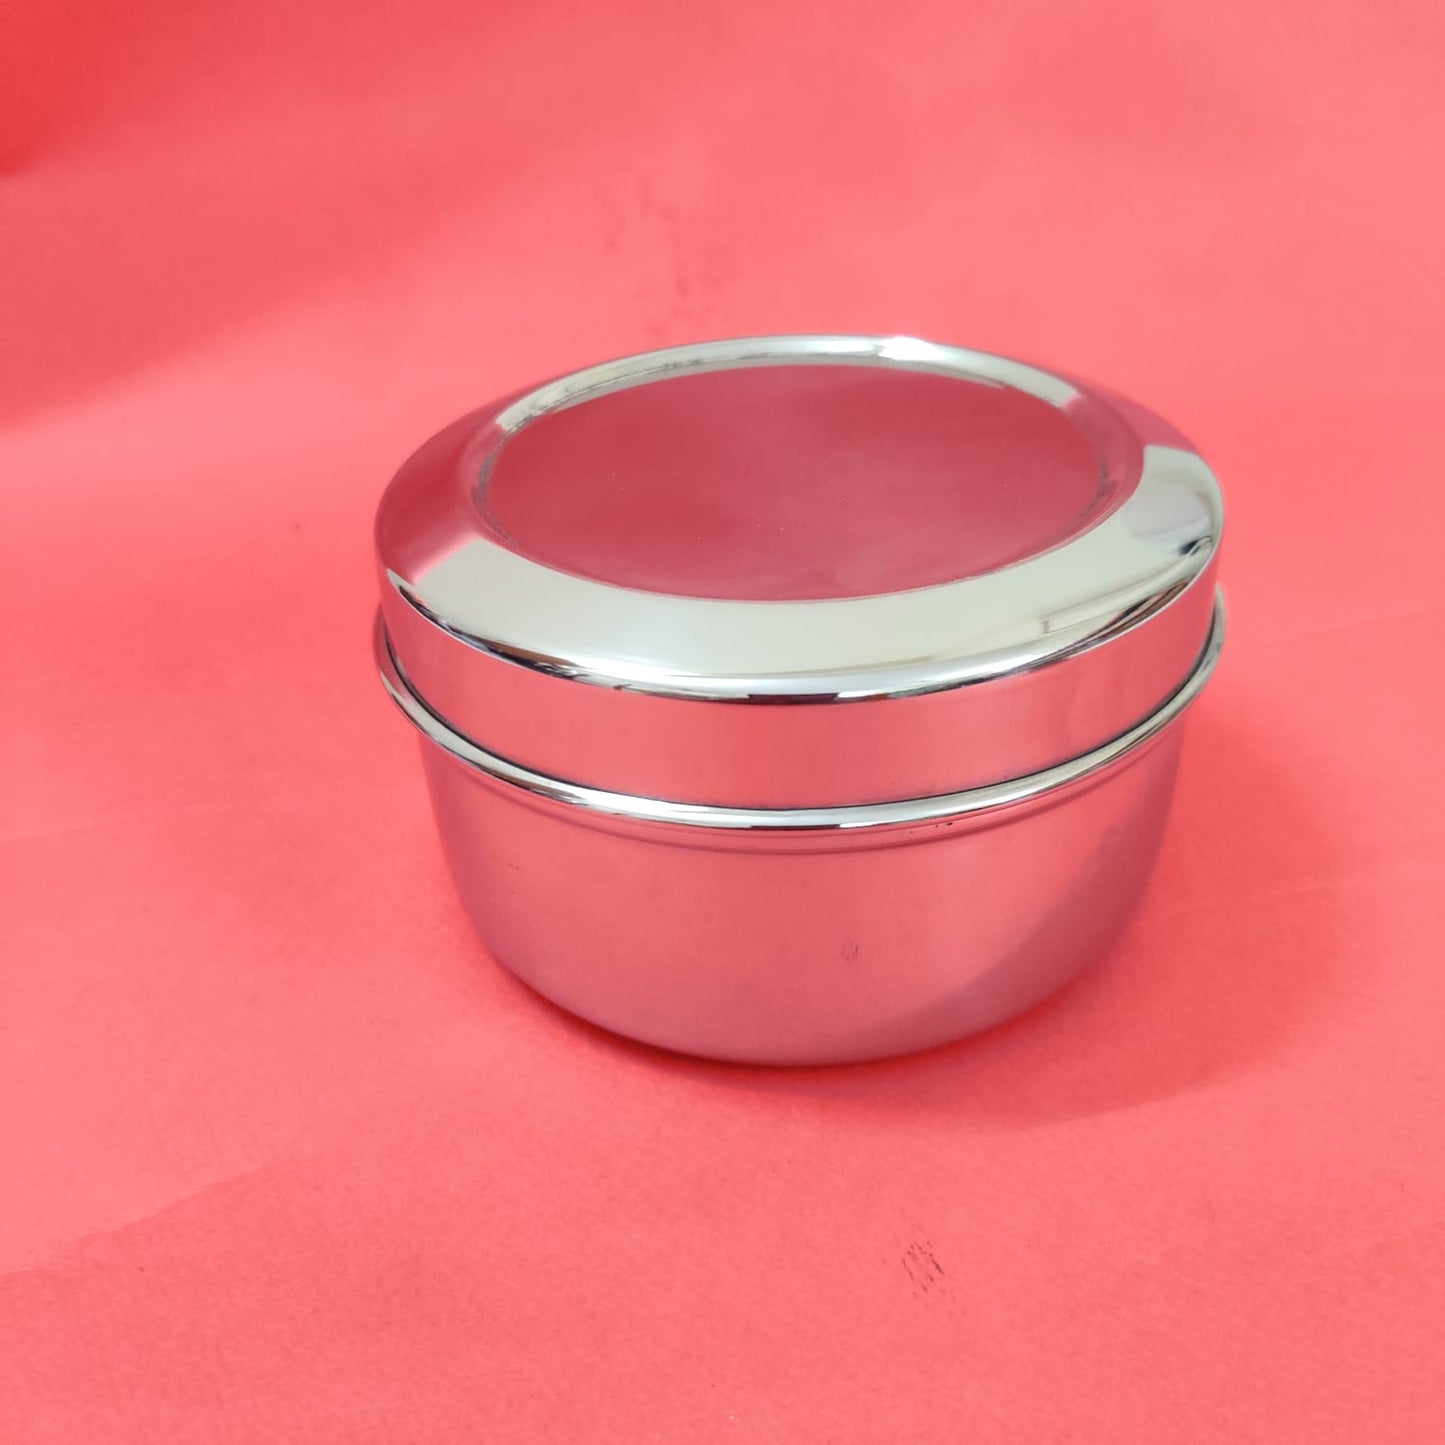 Take your poori game to the next level with our Poori Box Big in Stainless Steel! This sleek and durable box 